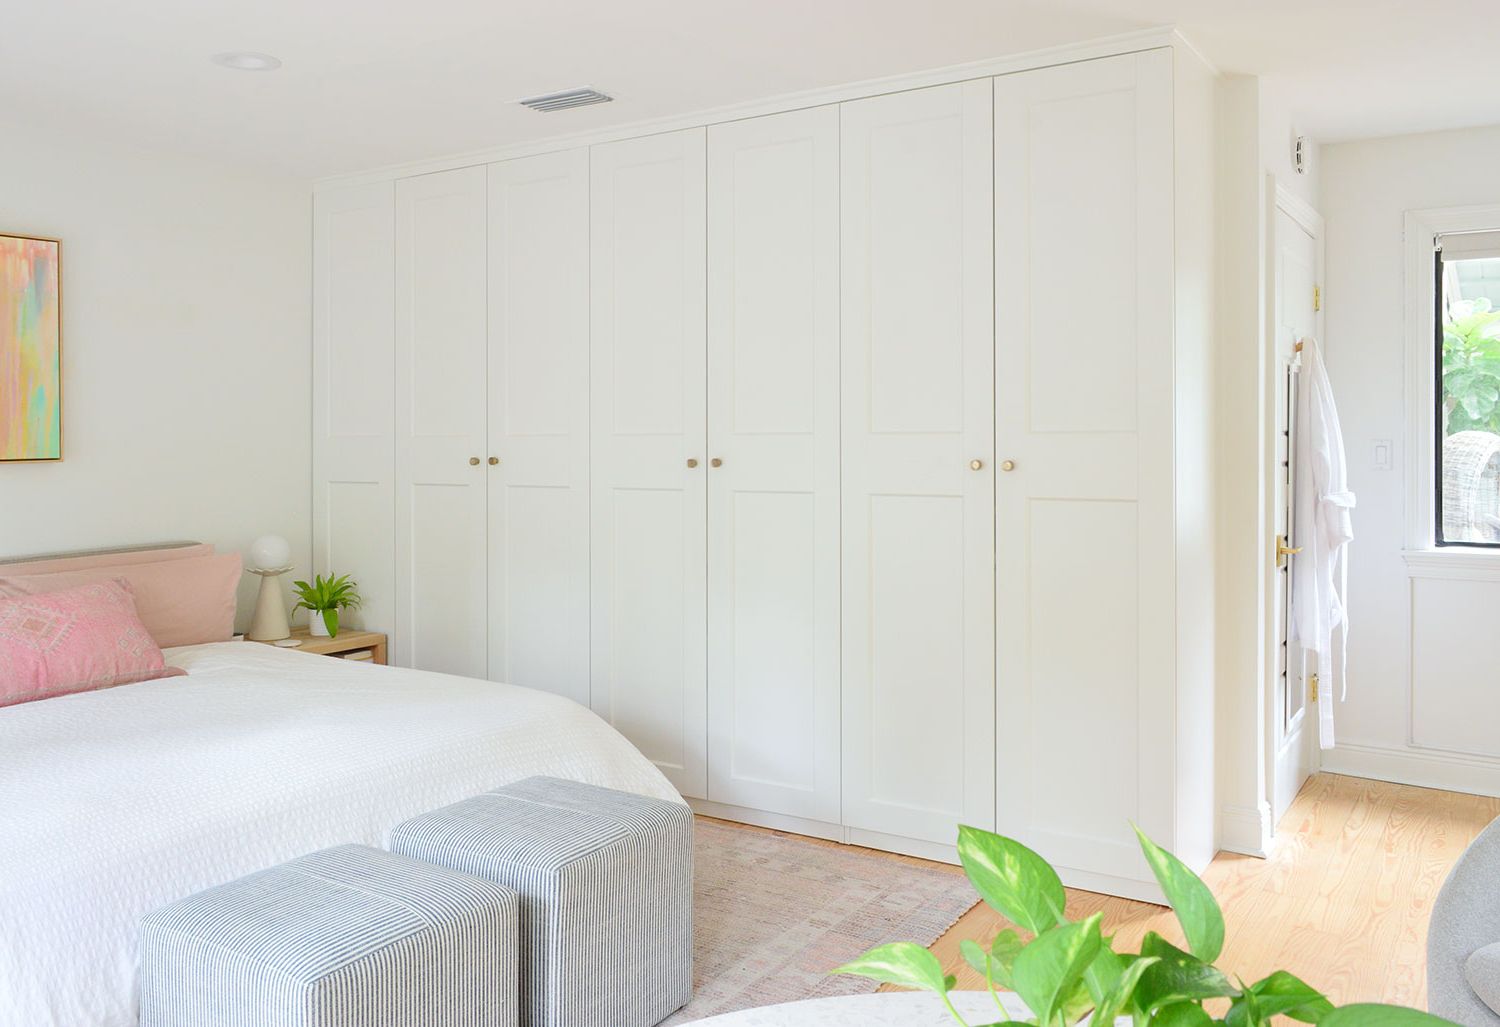 Making Ikea Pax Wardrobes Look Built In | Young House Love With Regard To French Built In Wardrobes (View 16 of 20)